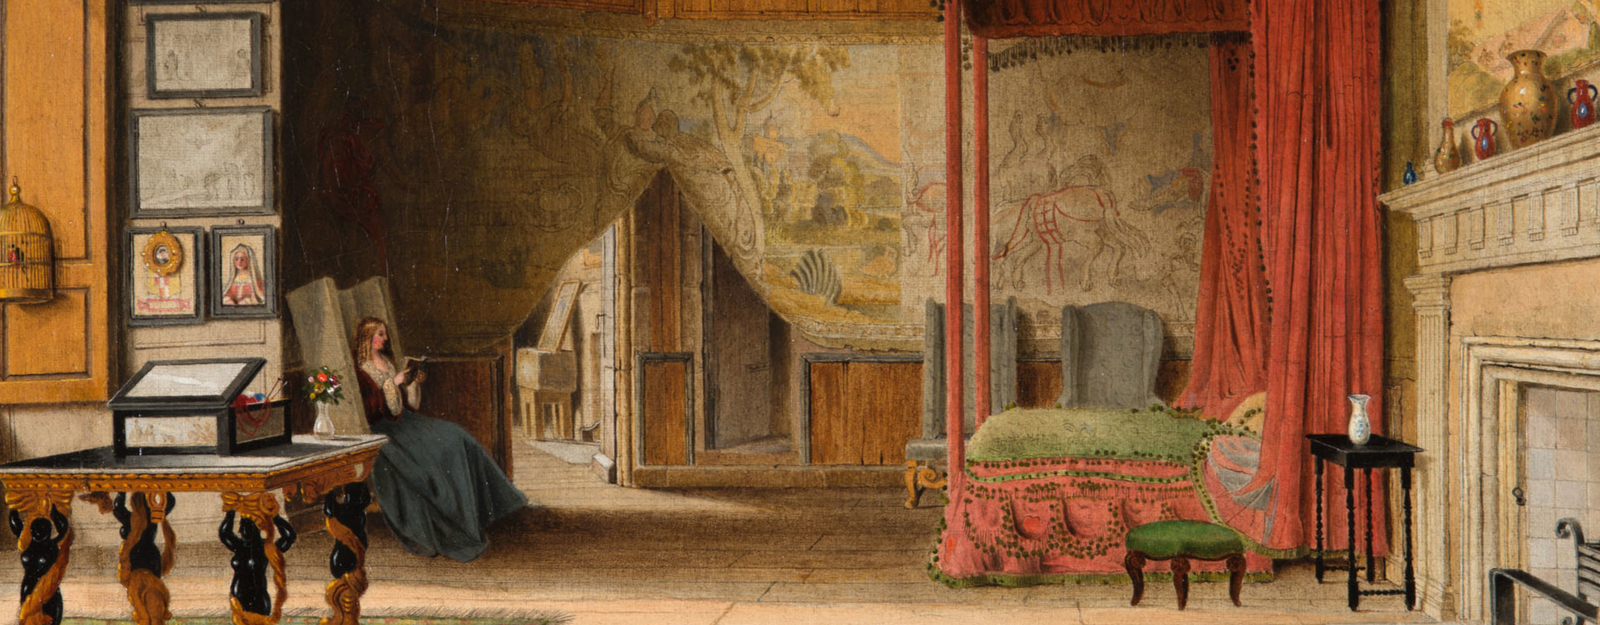 painting of Mary, Queen of Scots' chambers, Palace of Holyroodhouse